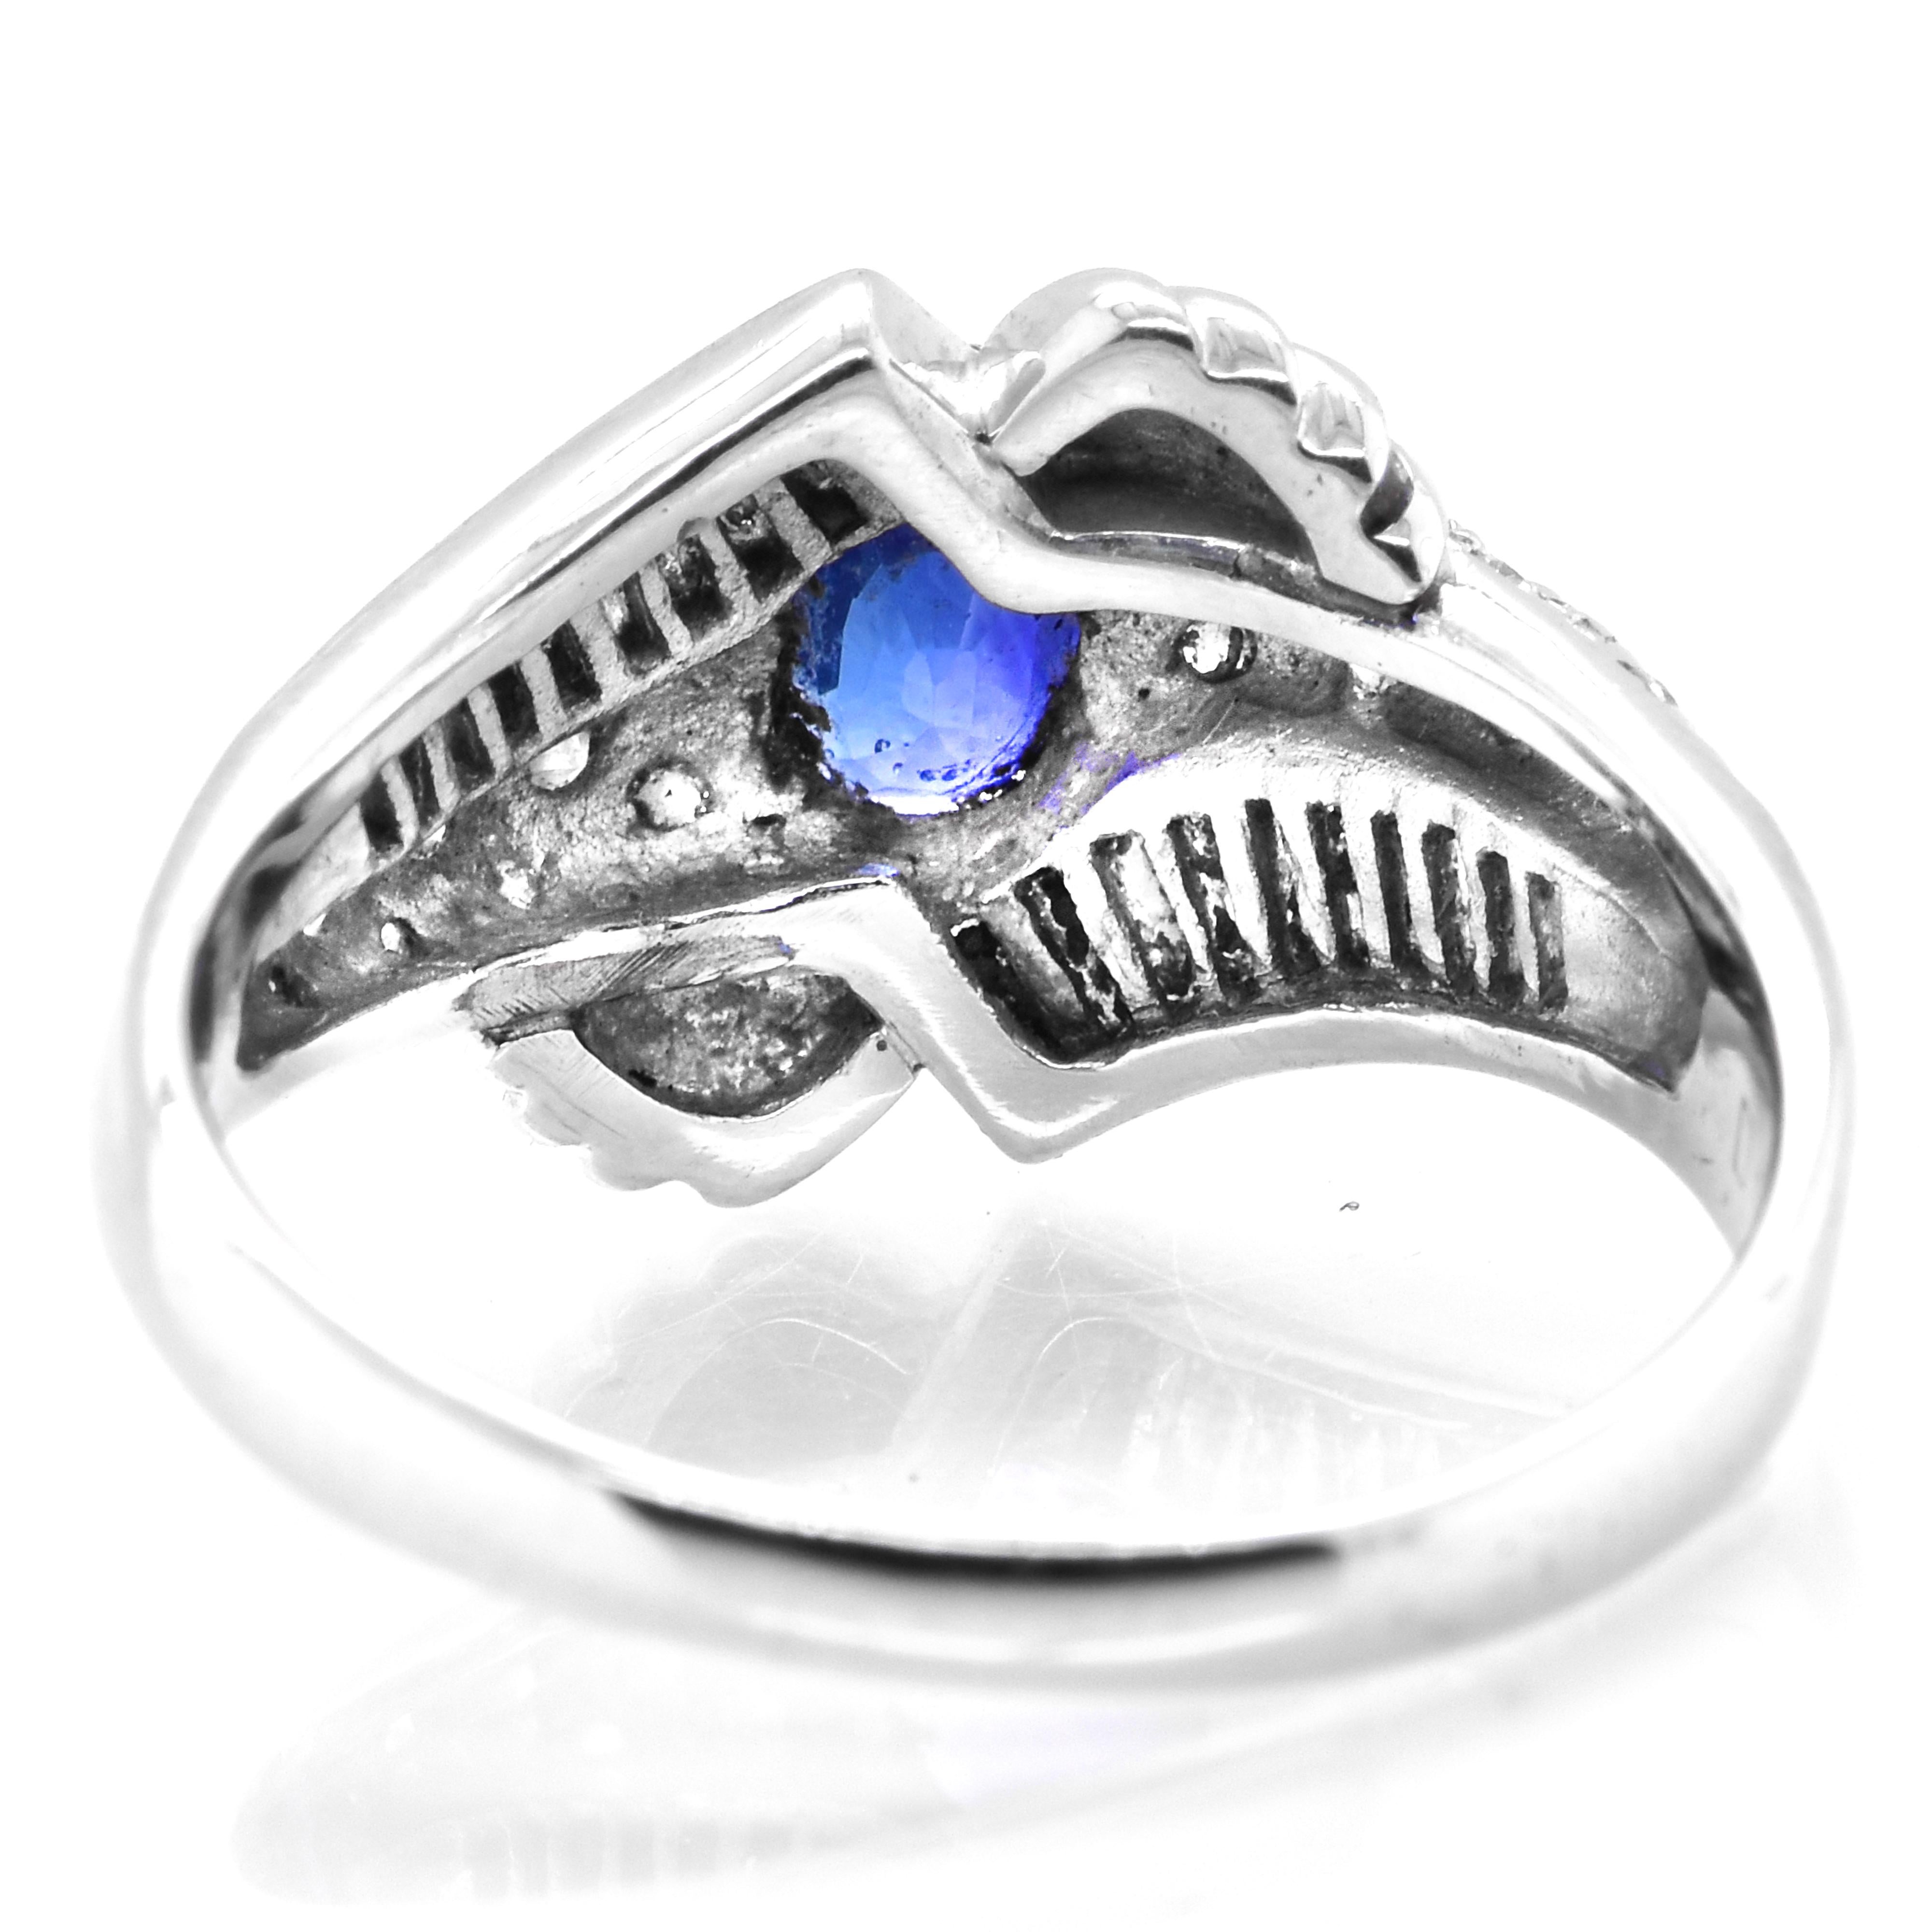 Women's Vintage Platinum Ring featuring a 1.05 Carat Blue Sapphire and Diamonds For Sale